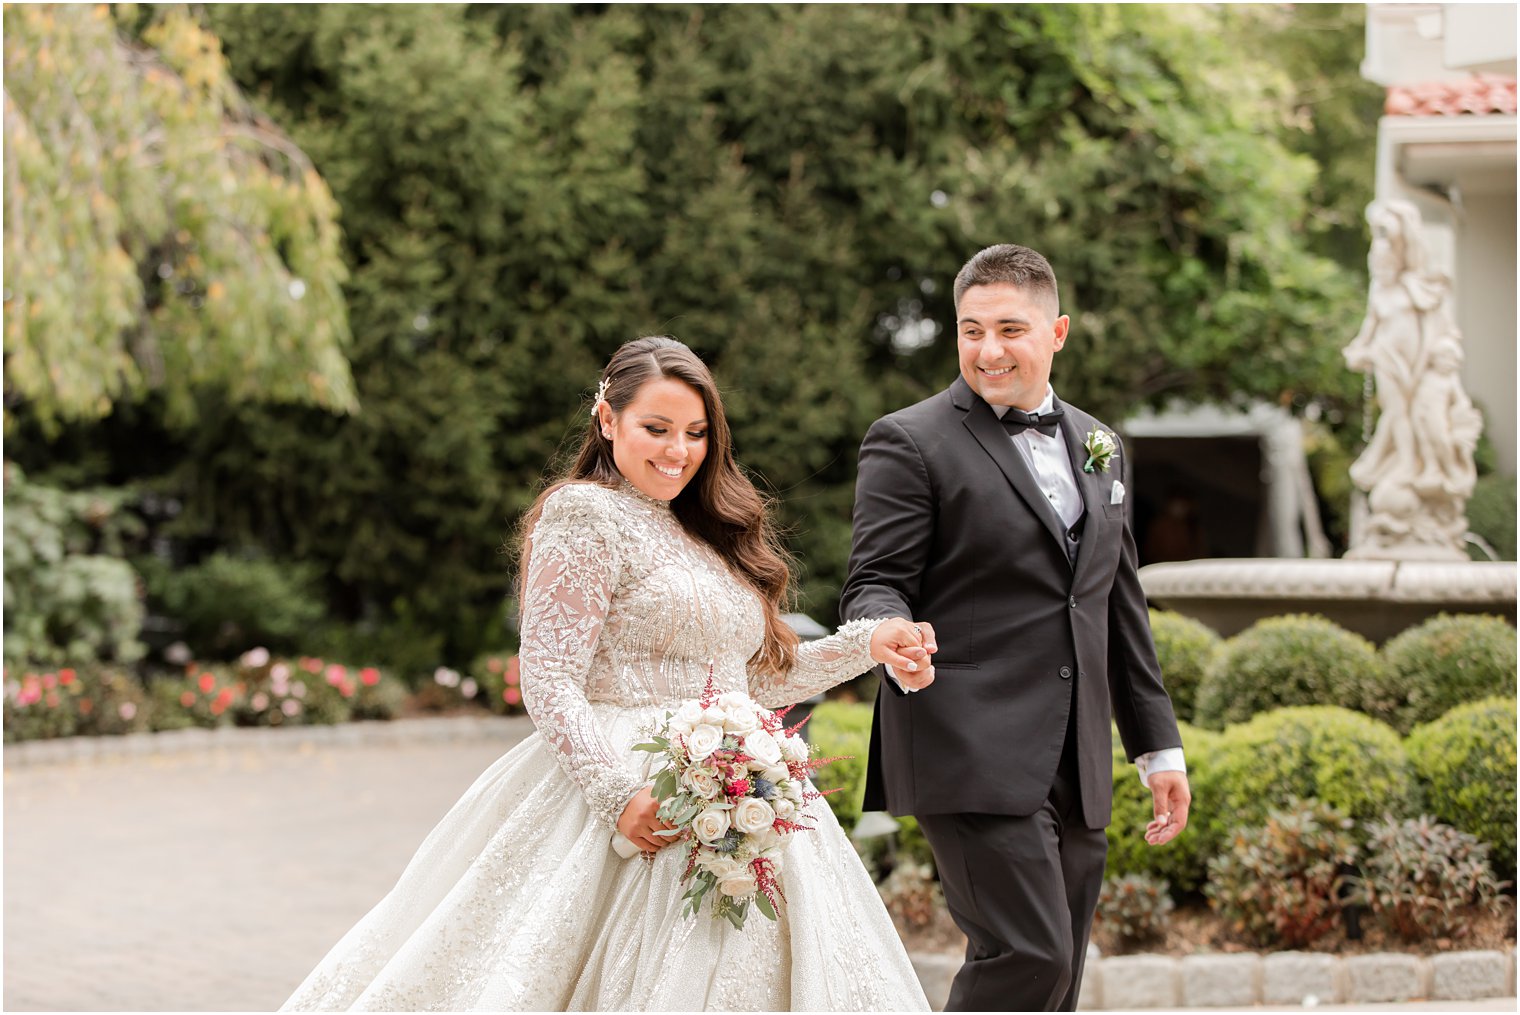 groom looks at bride while holding her hand and walking through garden